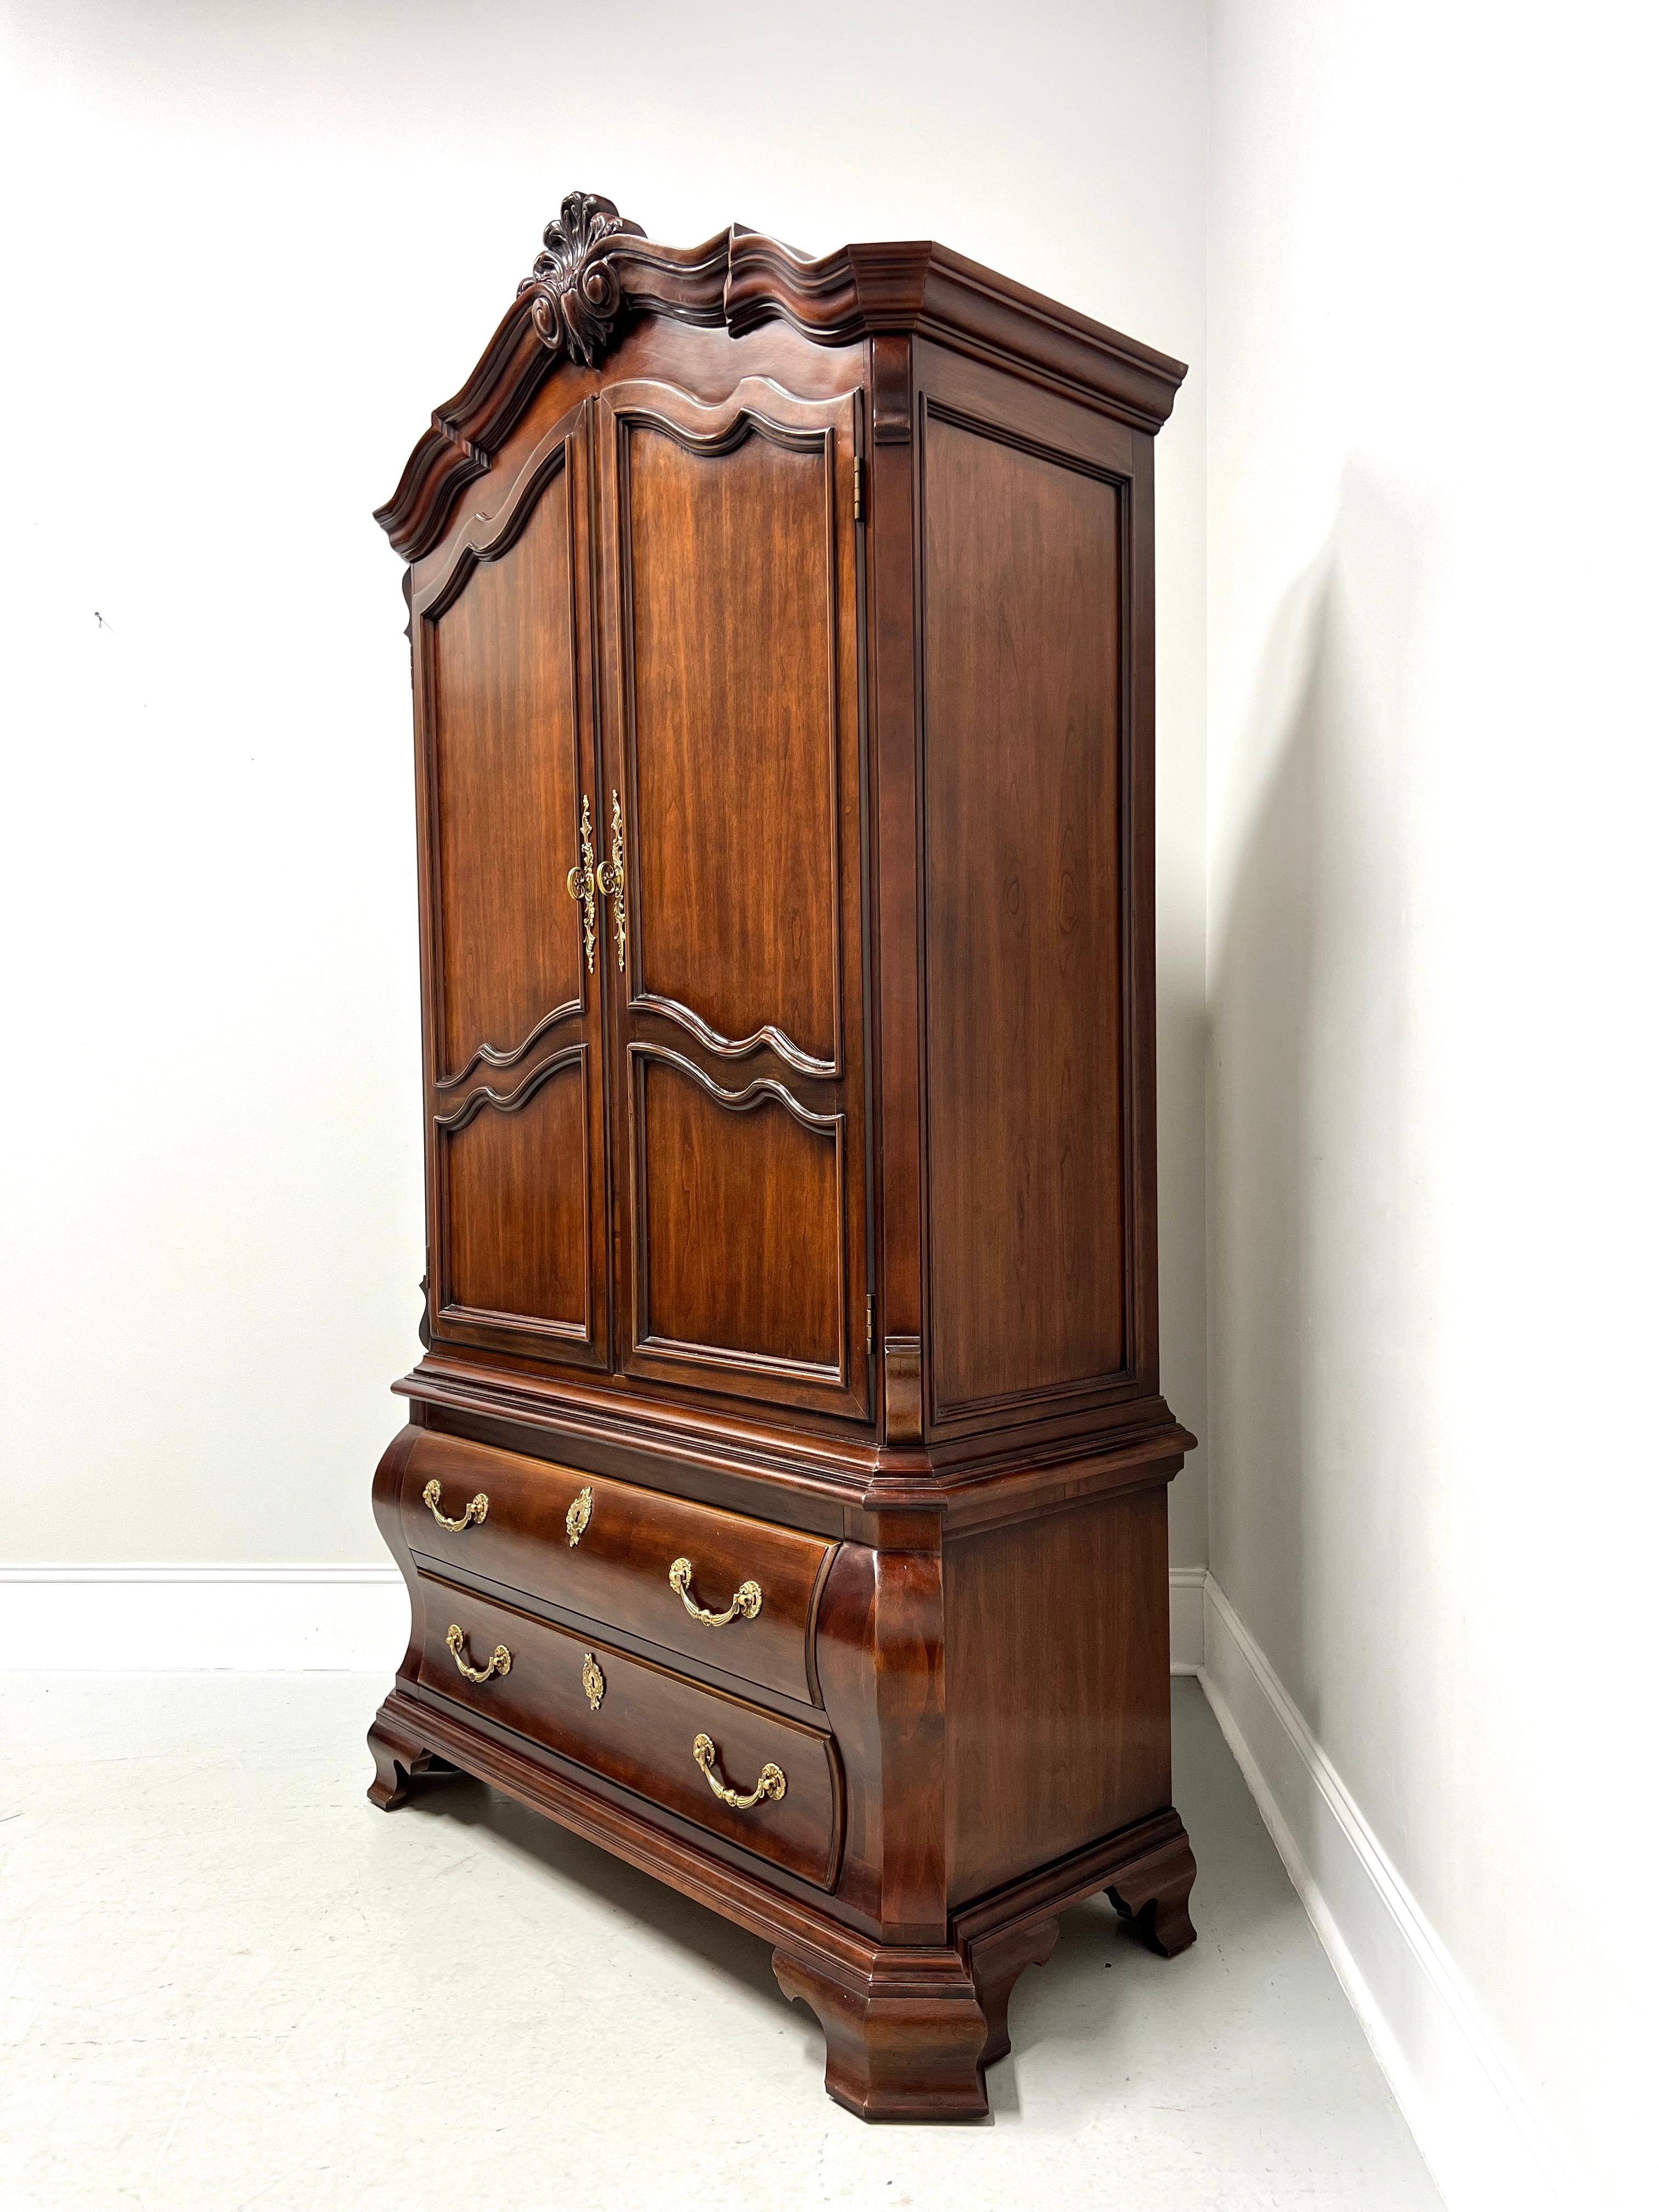 An Italian Provincial style armoire / linen press by Century Furniture, from their Cardella Collection. Cherry wood with decorative brass hardware, crown molding with carved details, arched doors, bombe shape & clipped corners to lower chest, and